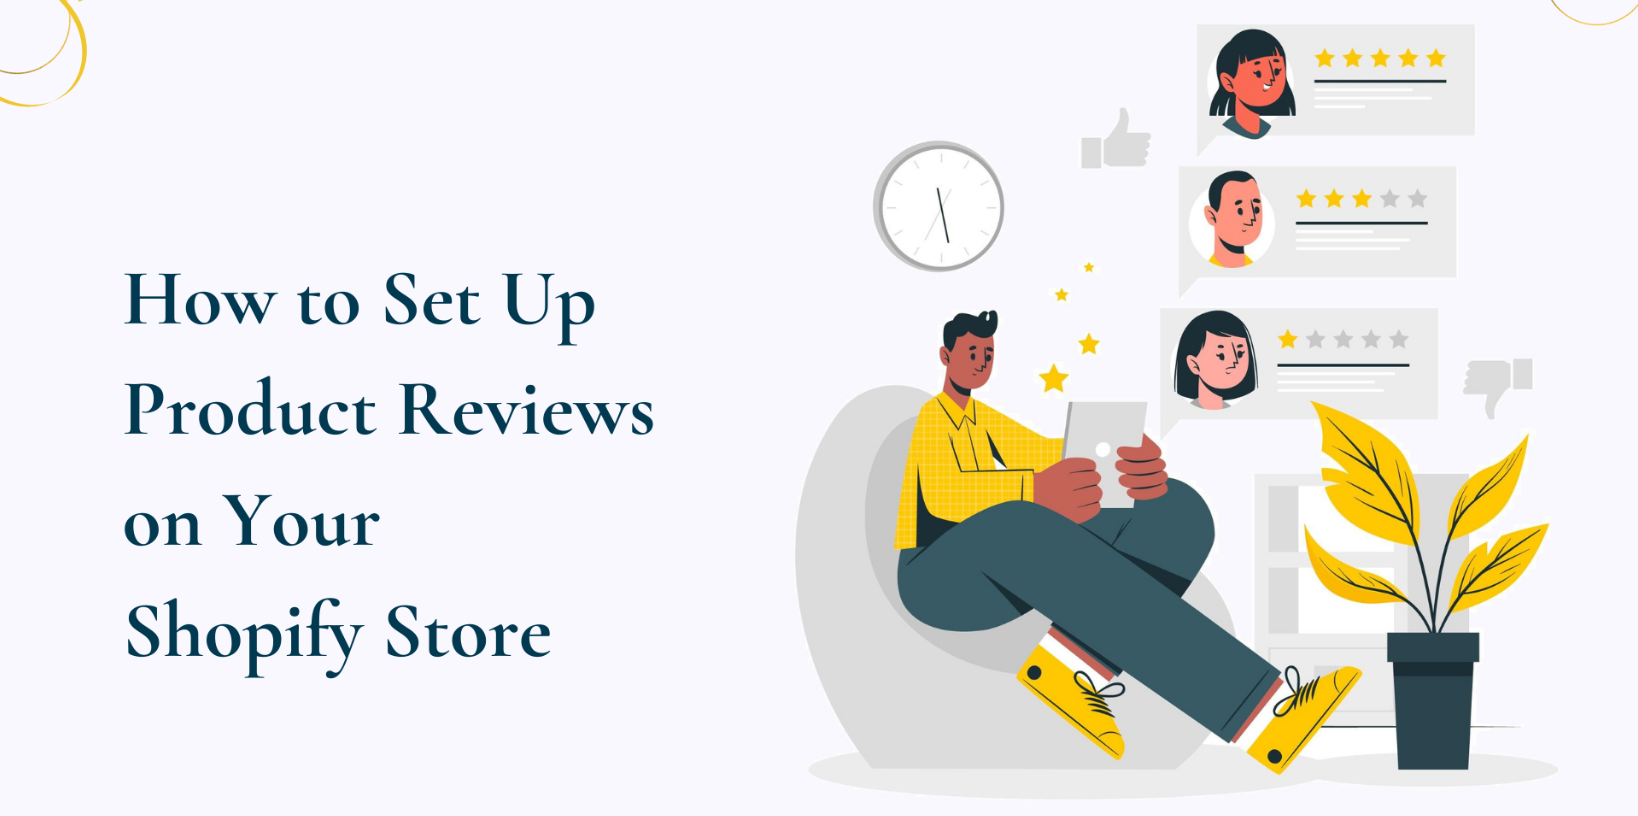 Simplify Your Store Setup: Importing Reviews to Shopify